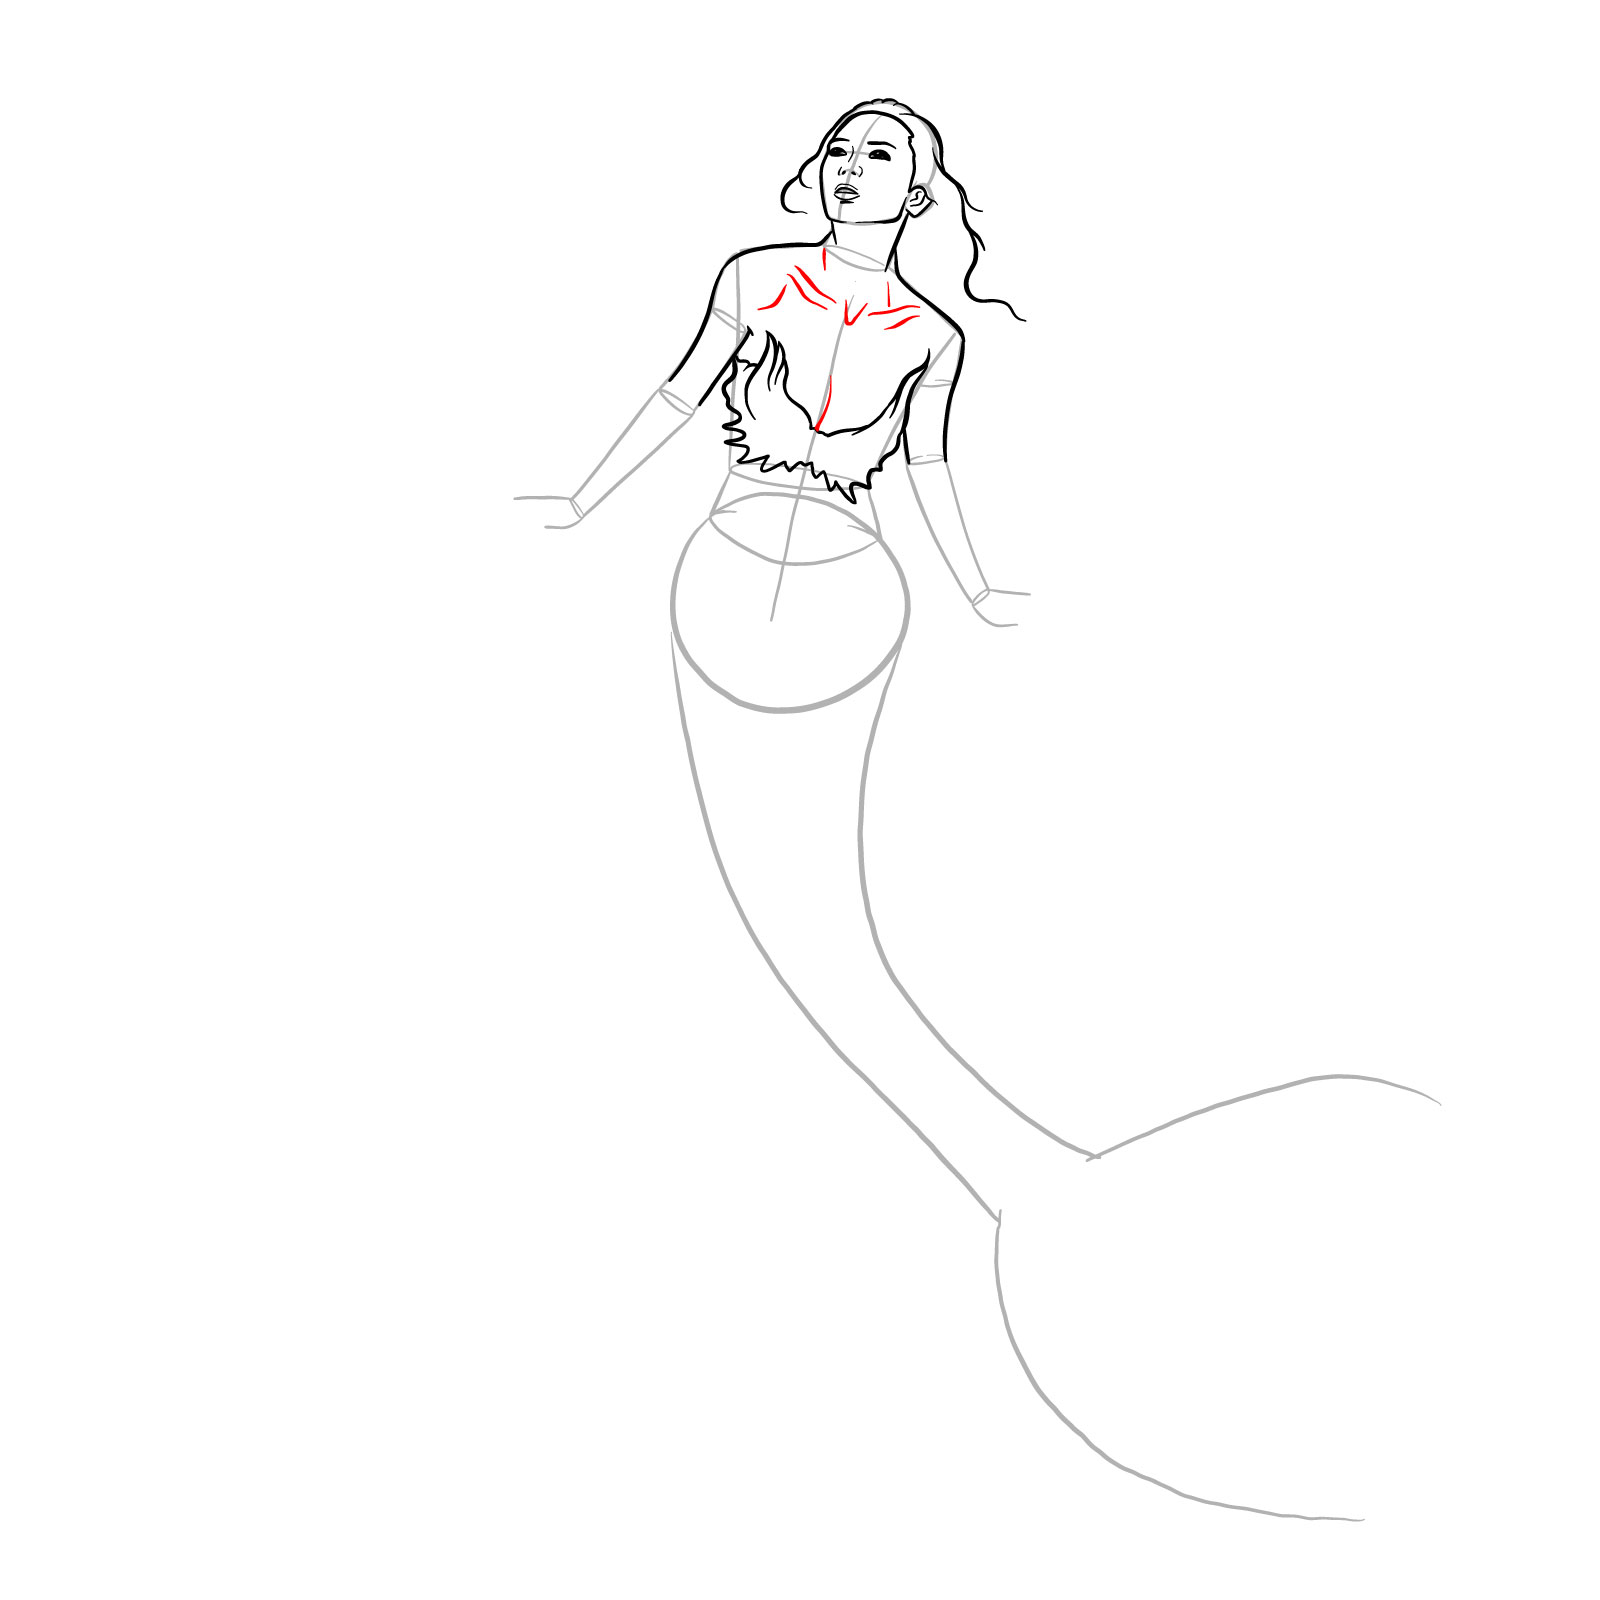 How to draw a Mermaid - step 13